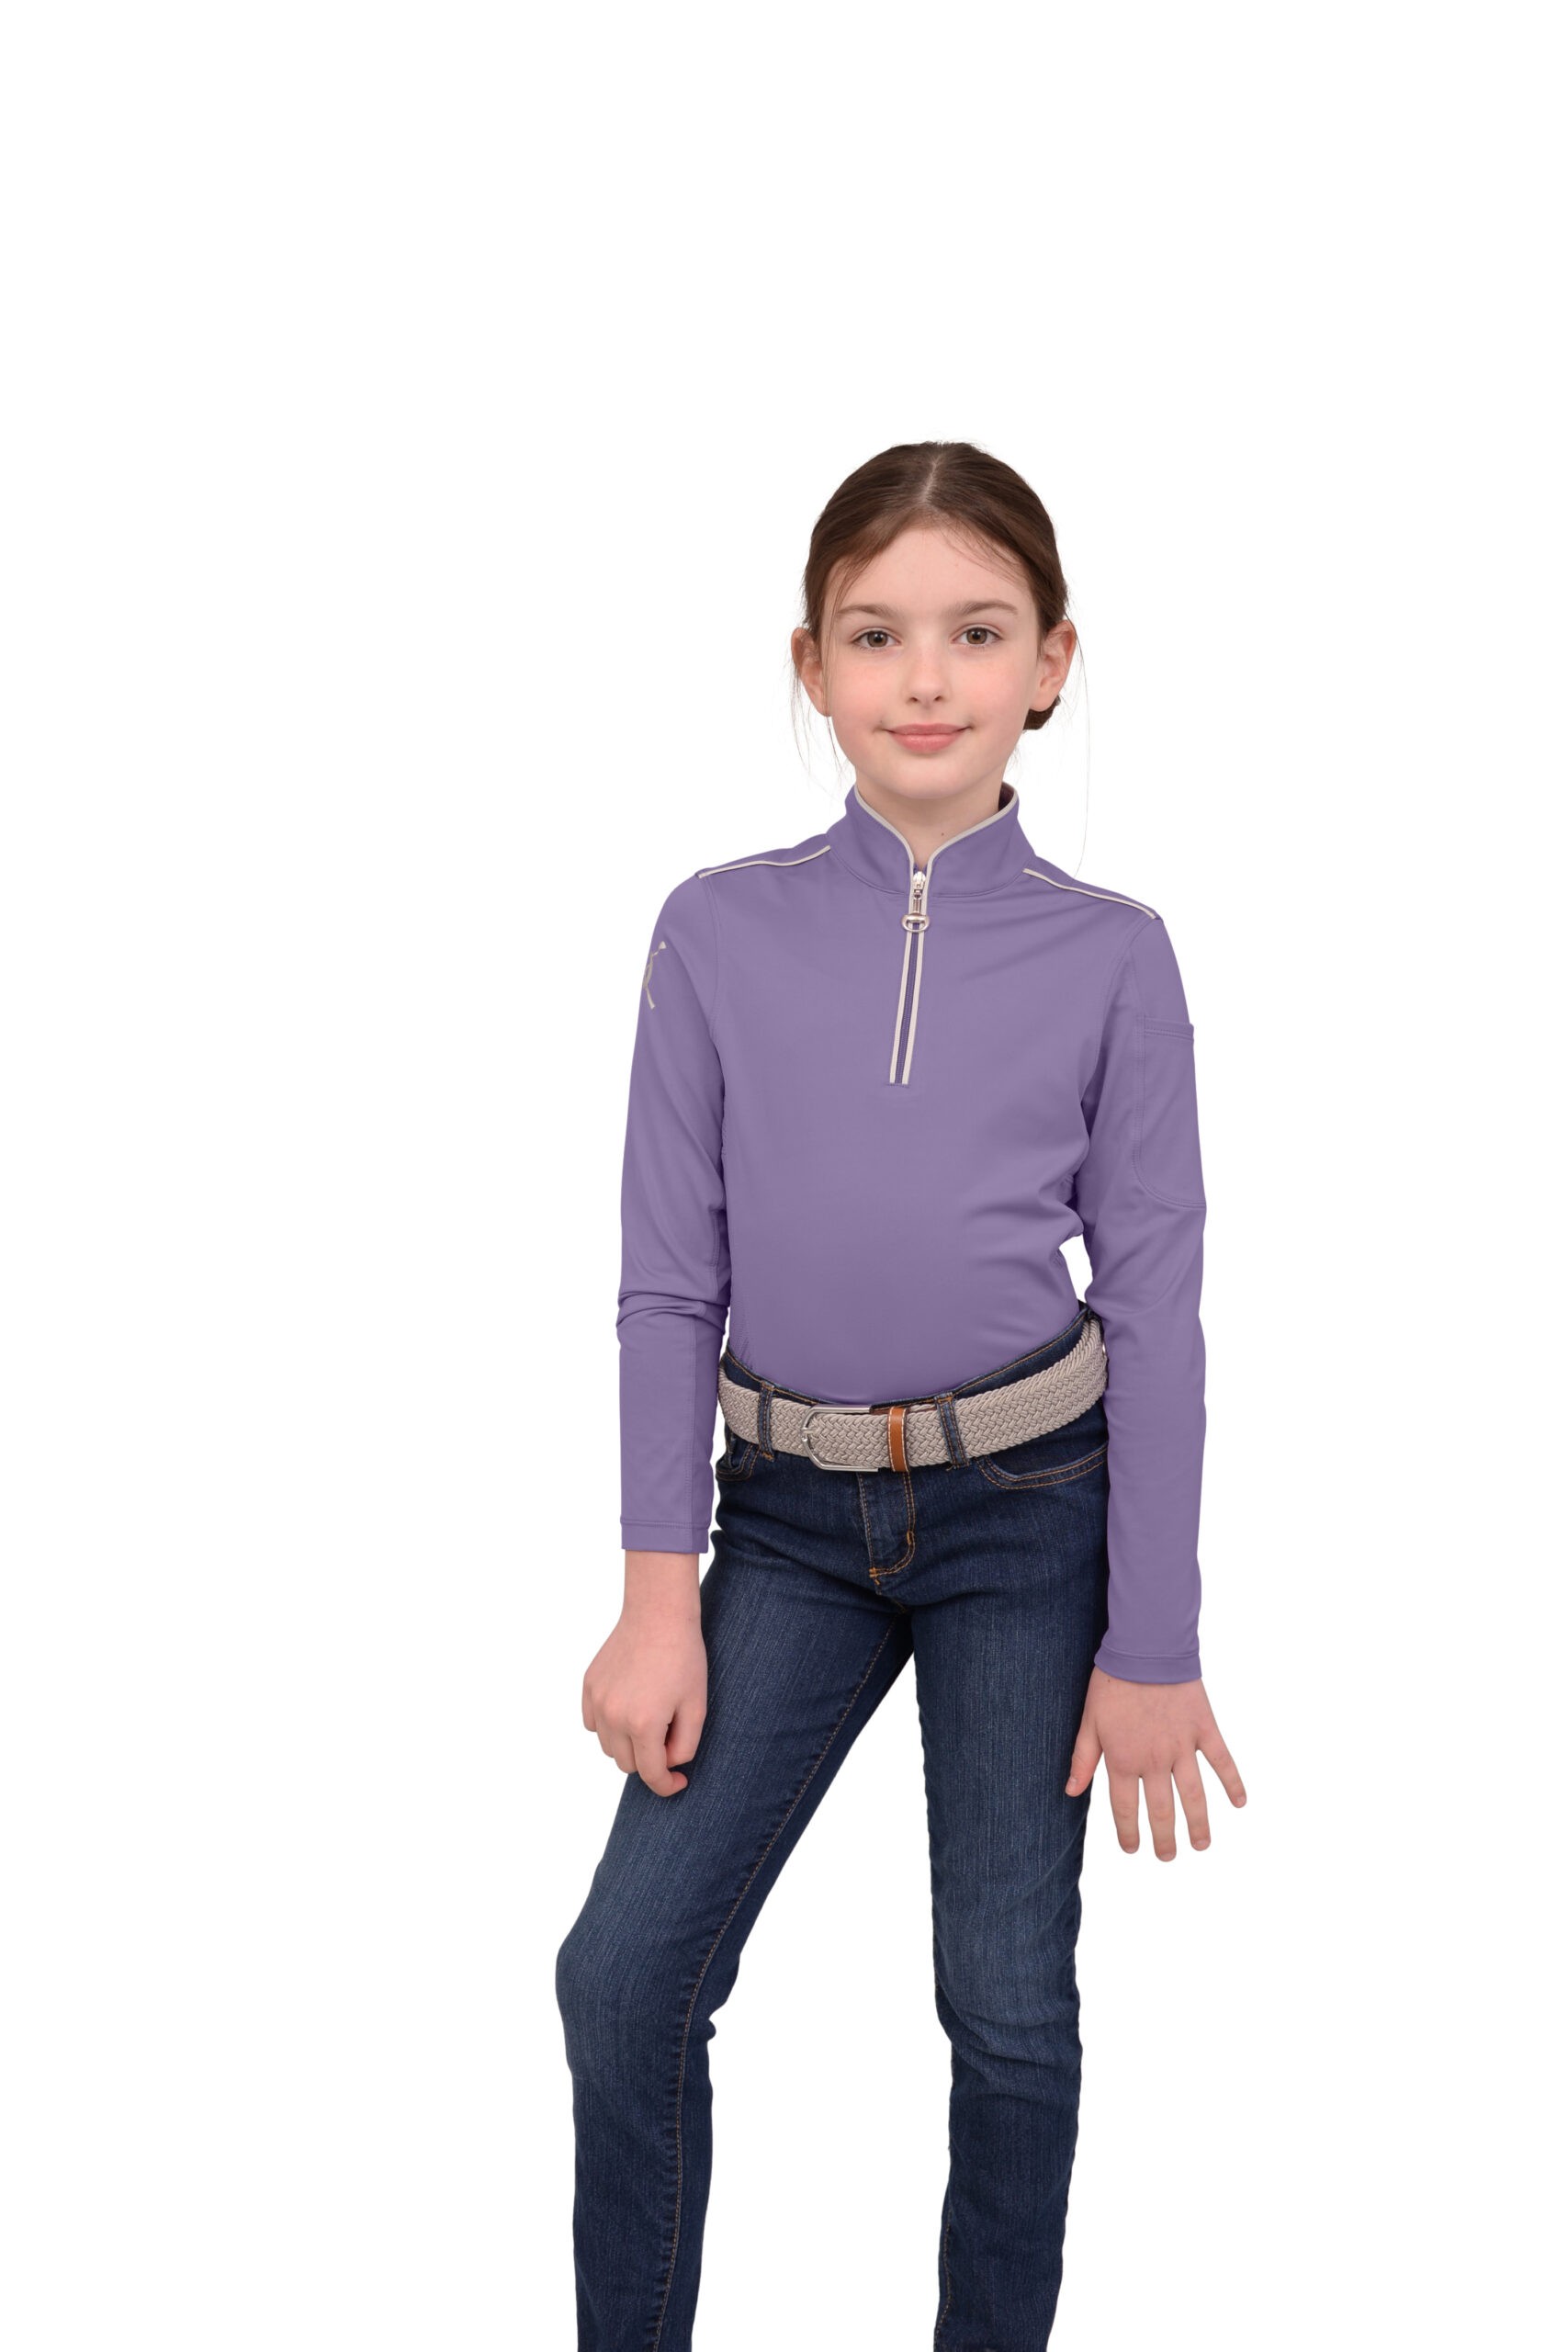 Performance Rider SkyCool® Youth Shirt Long Sleeve - Solid